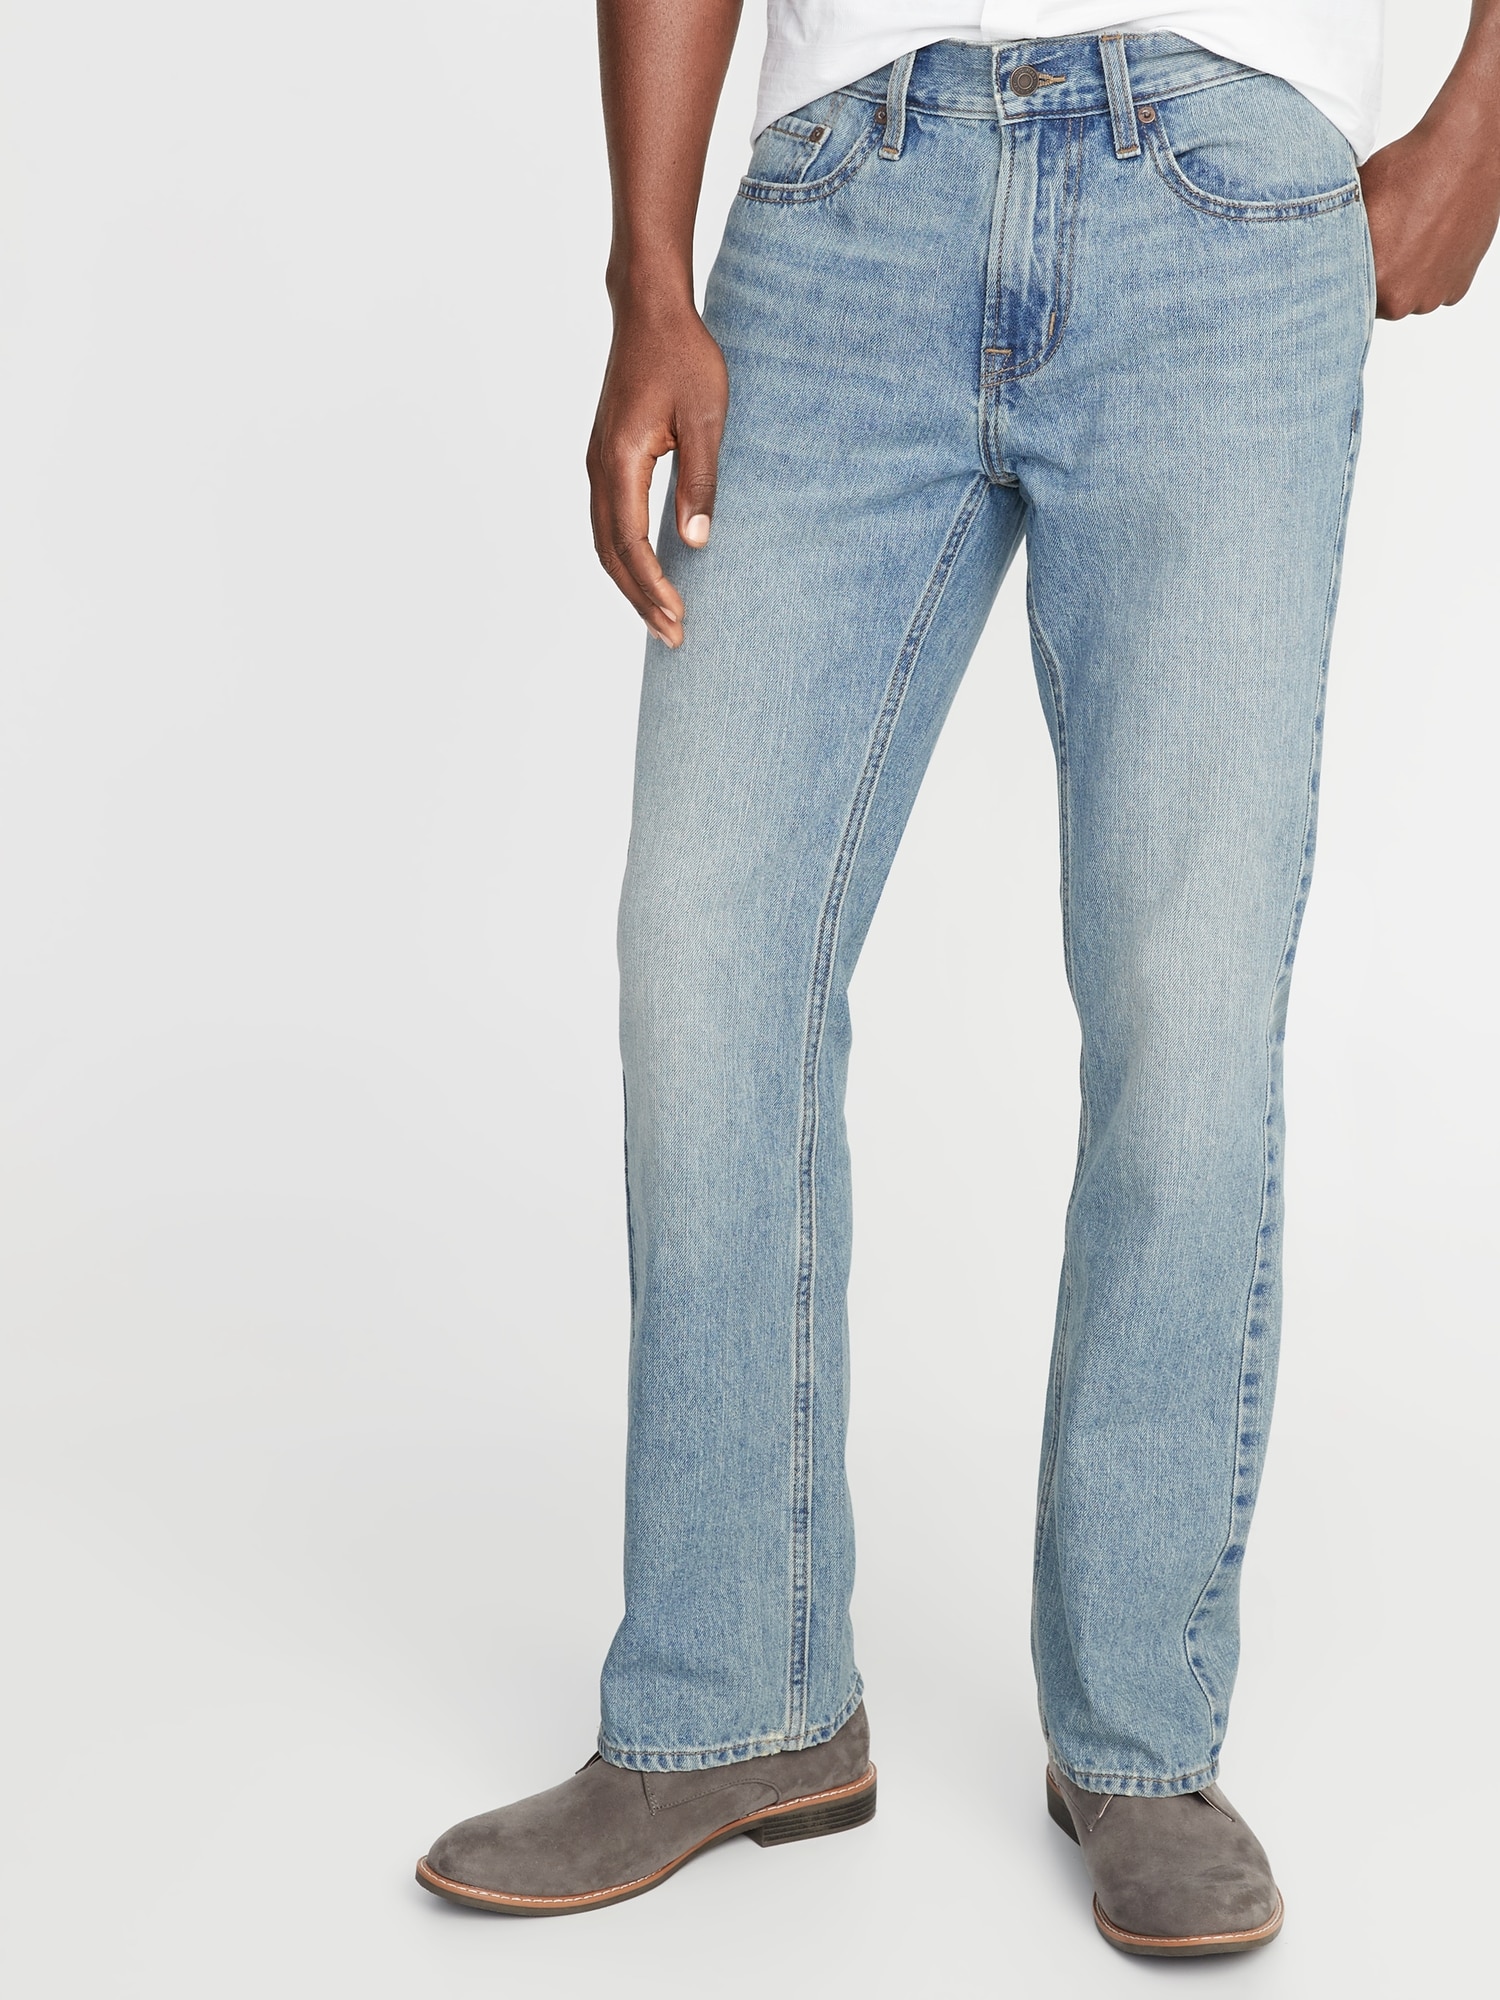 old navy mens jeans